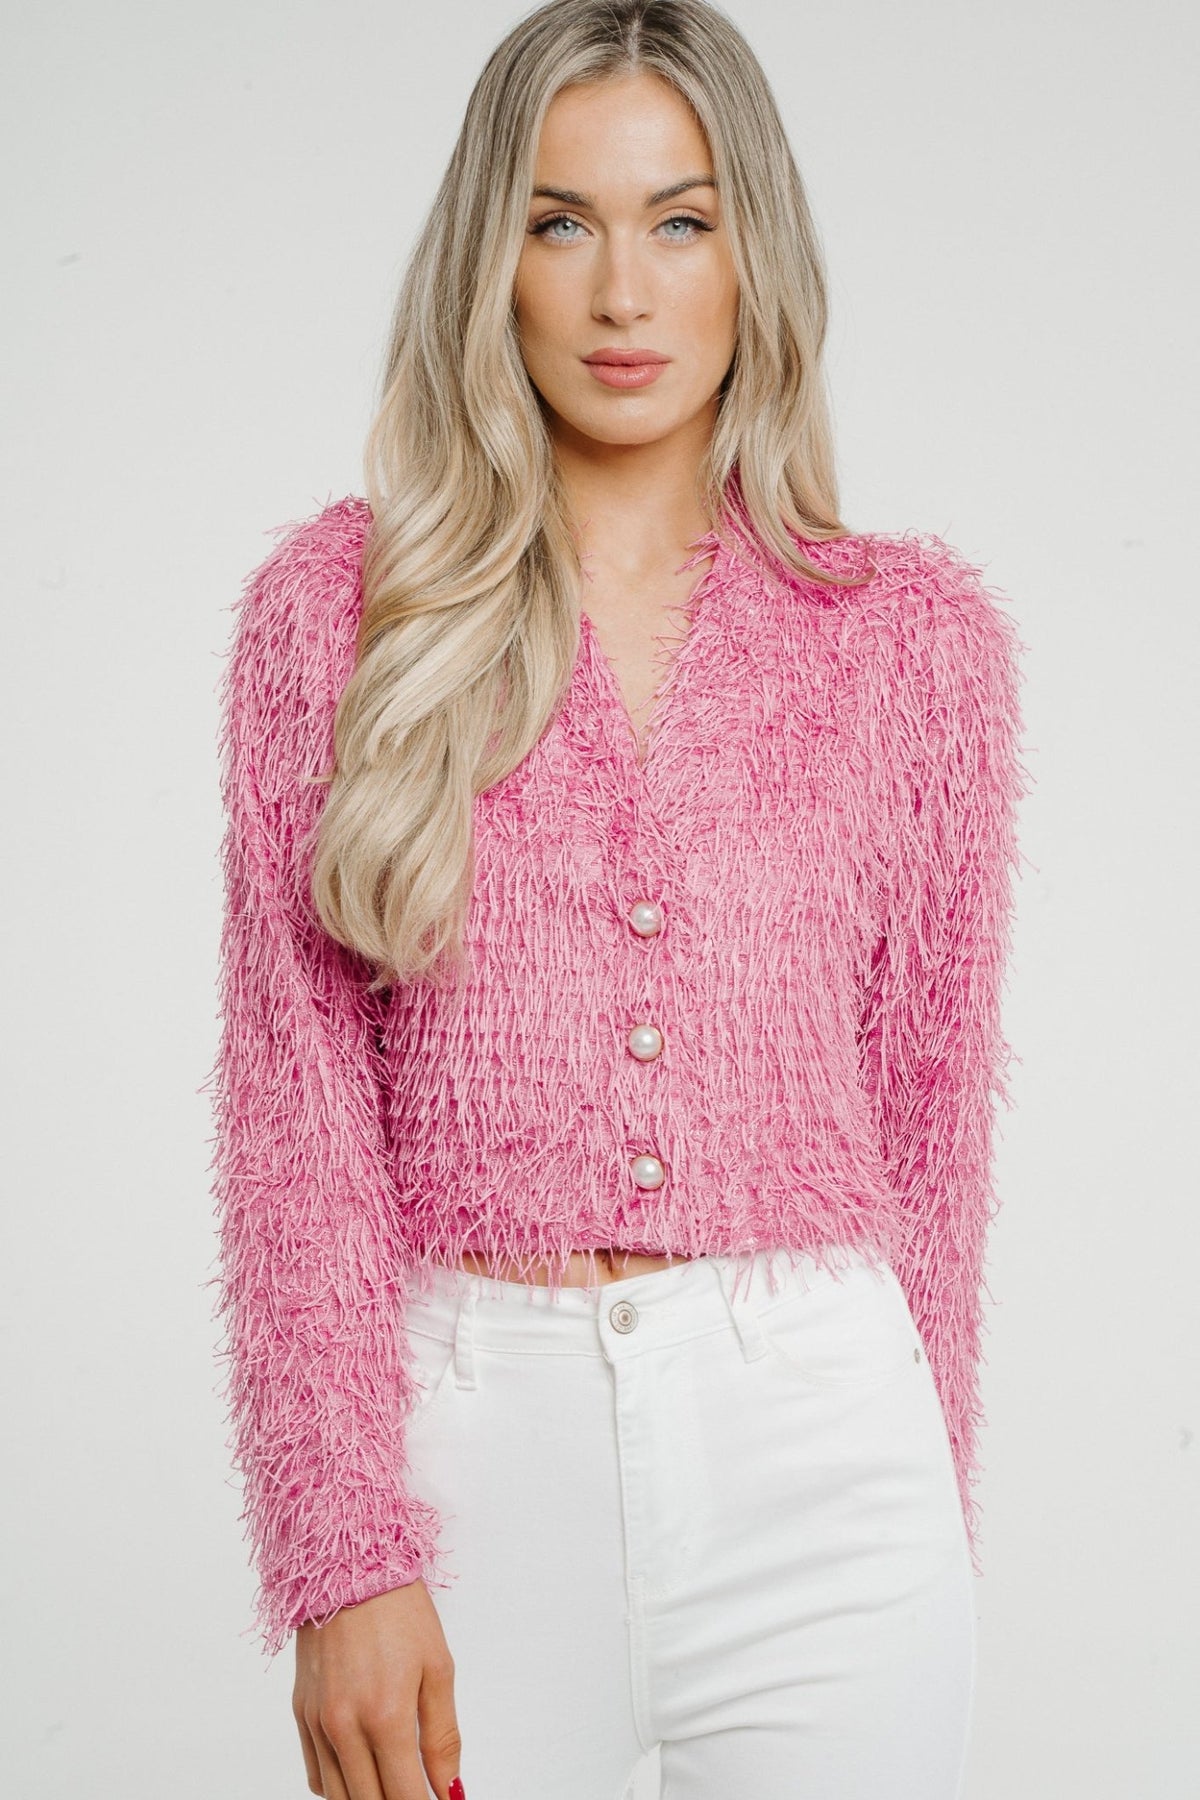 Polly Textured Jacket In Pink - The Walk in Wardrobe